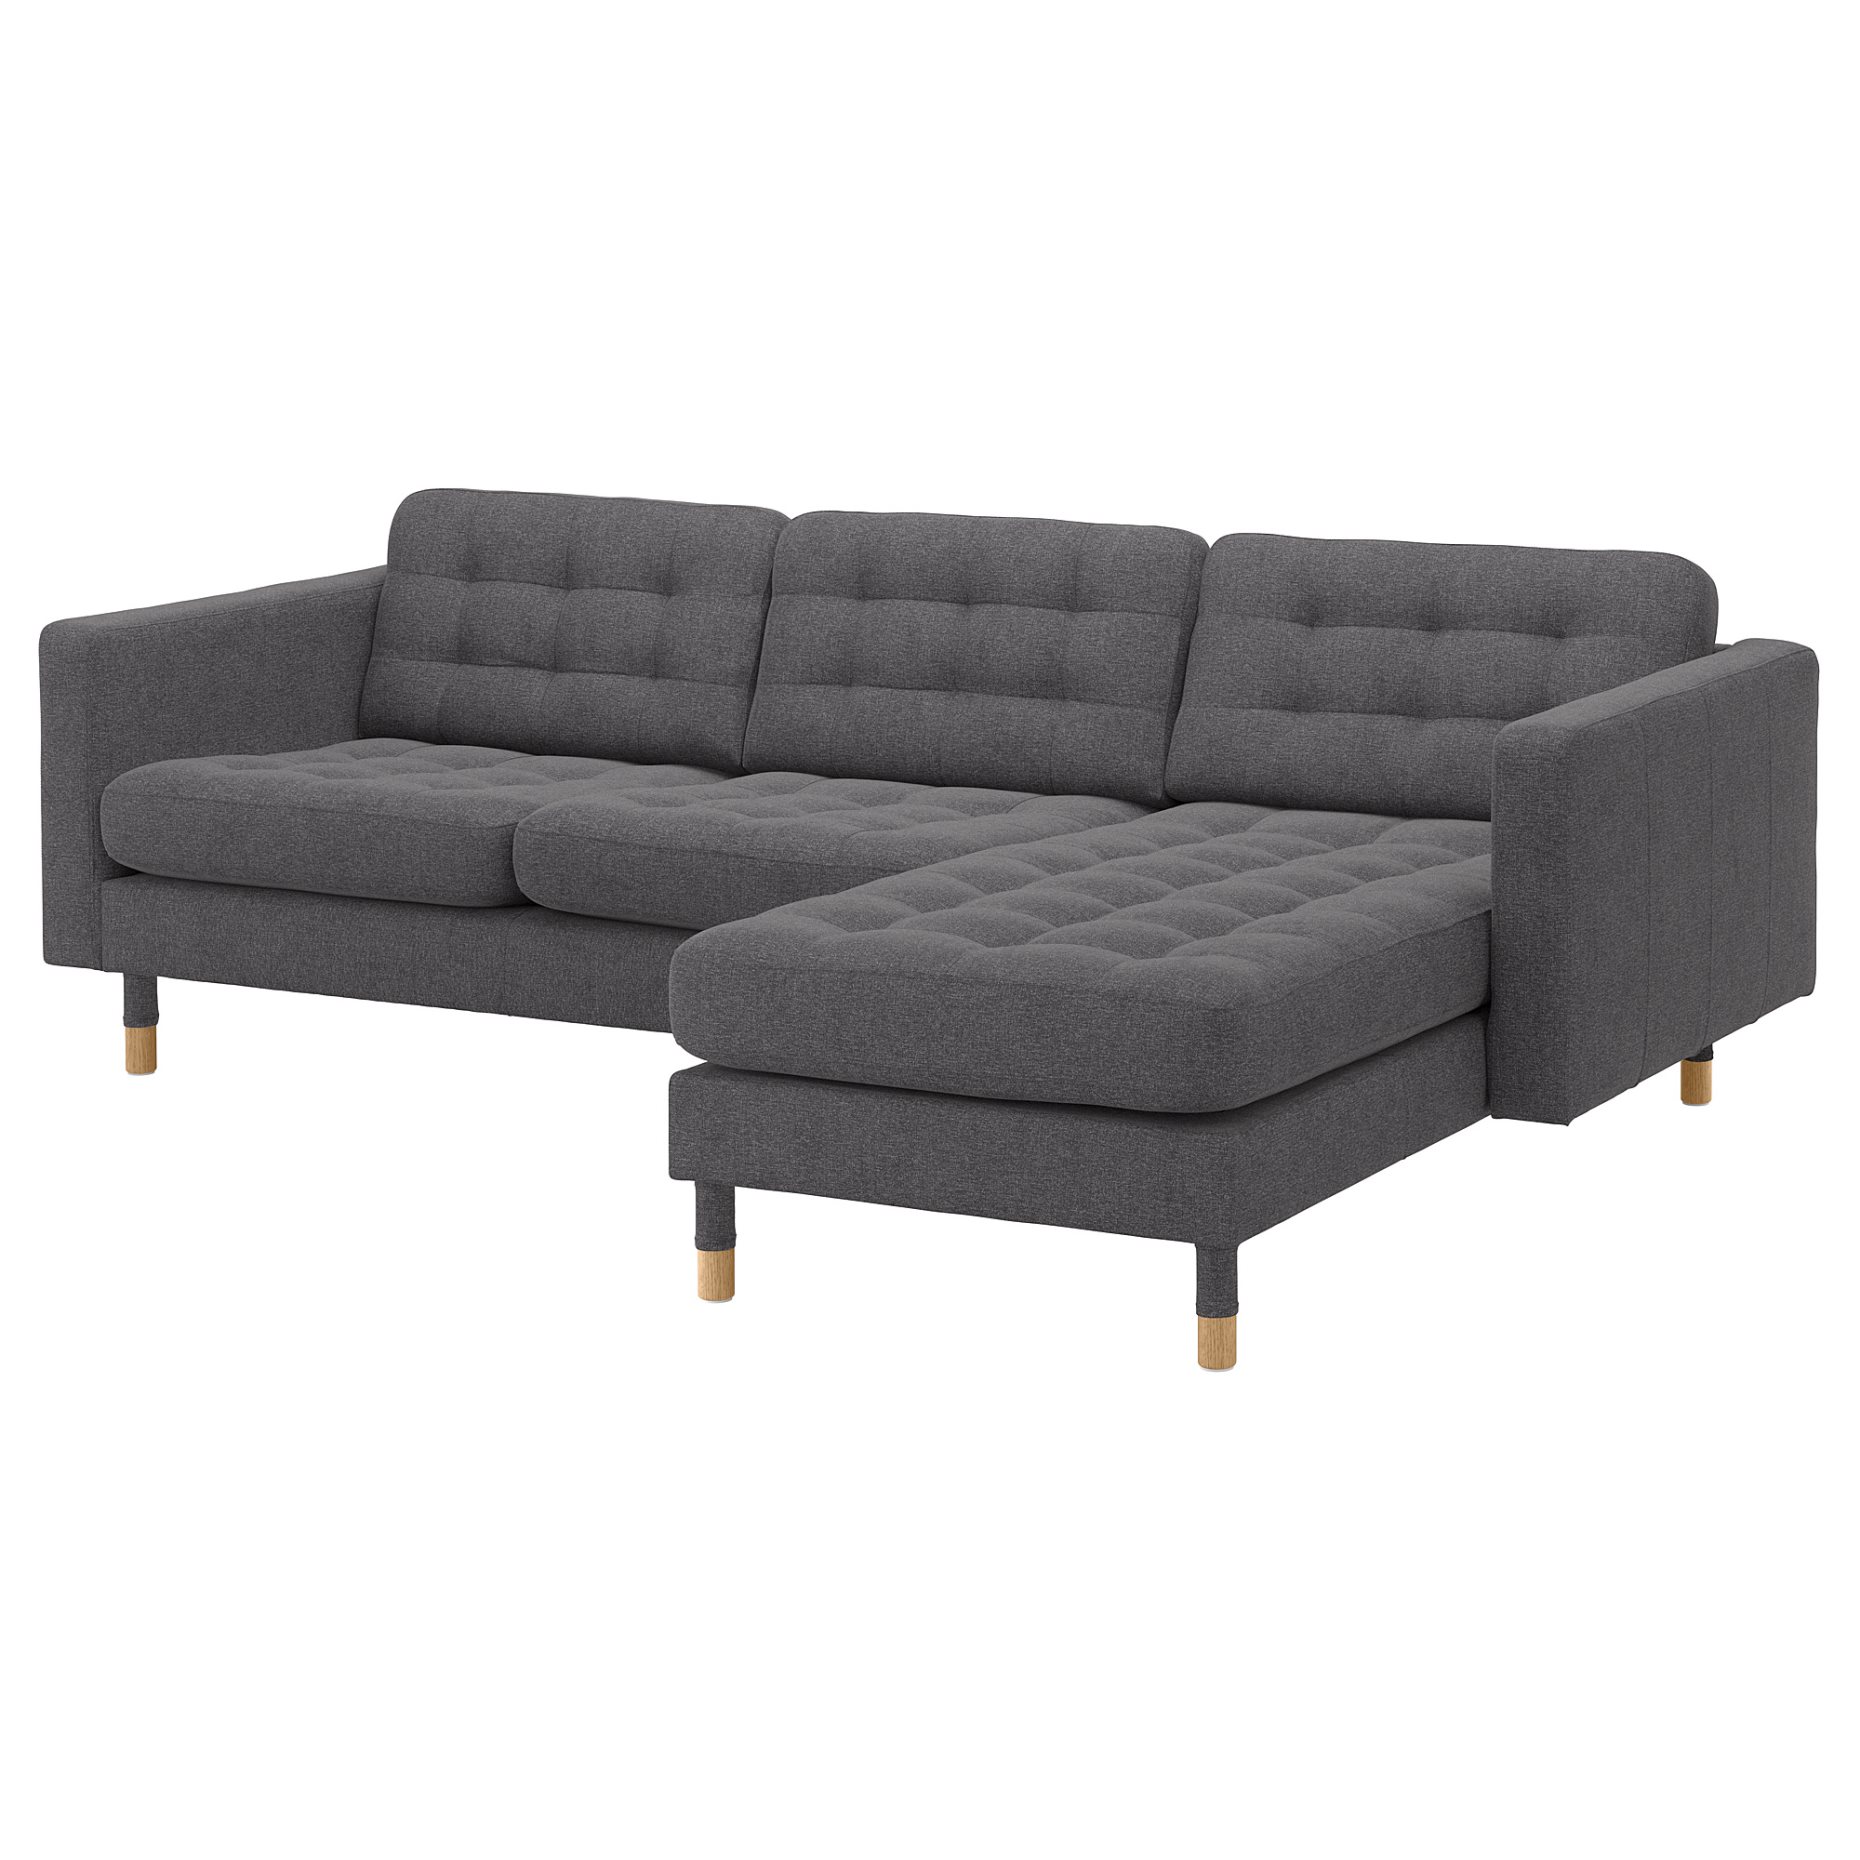 LANDSKRONA, 3-seat sofa with chaise longue, 092.726.66